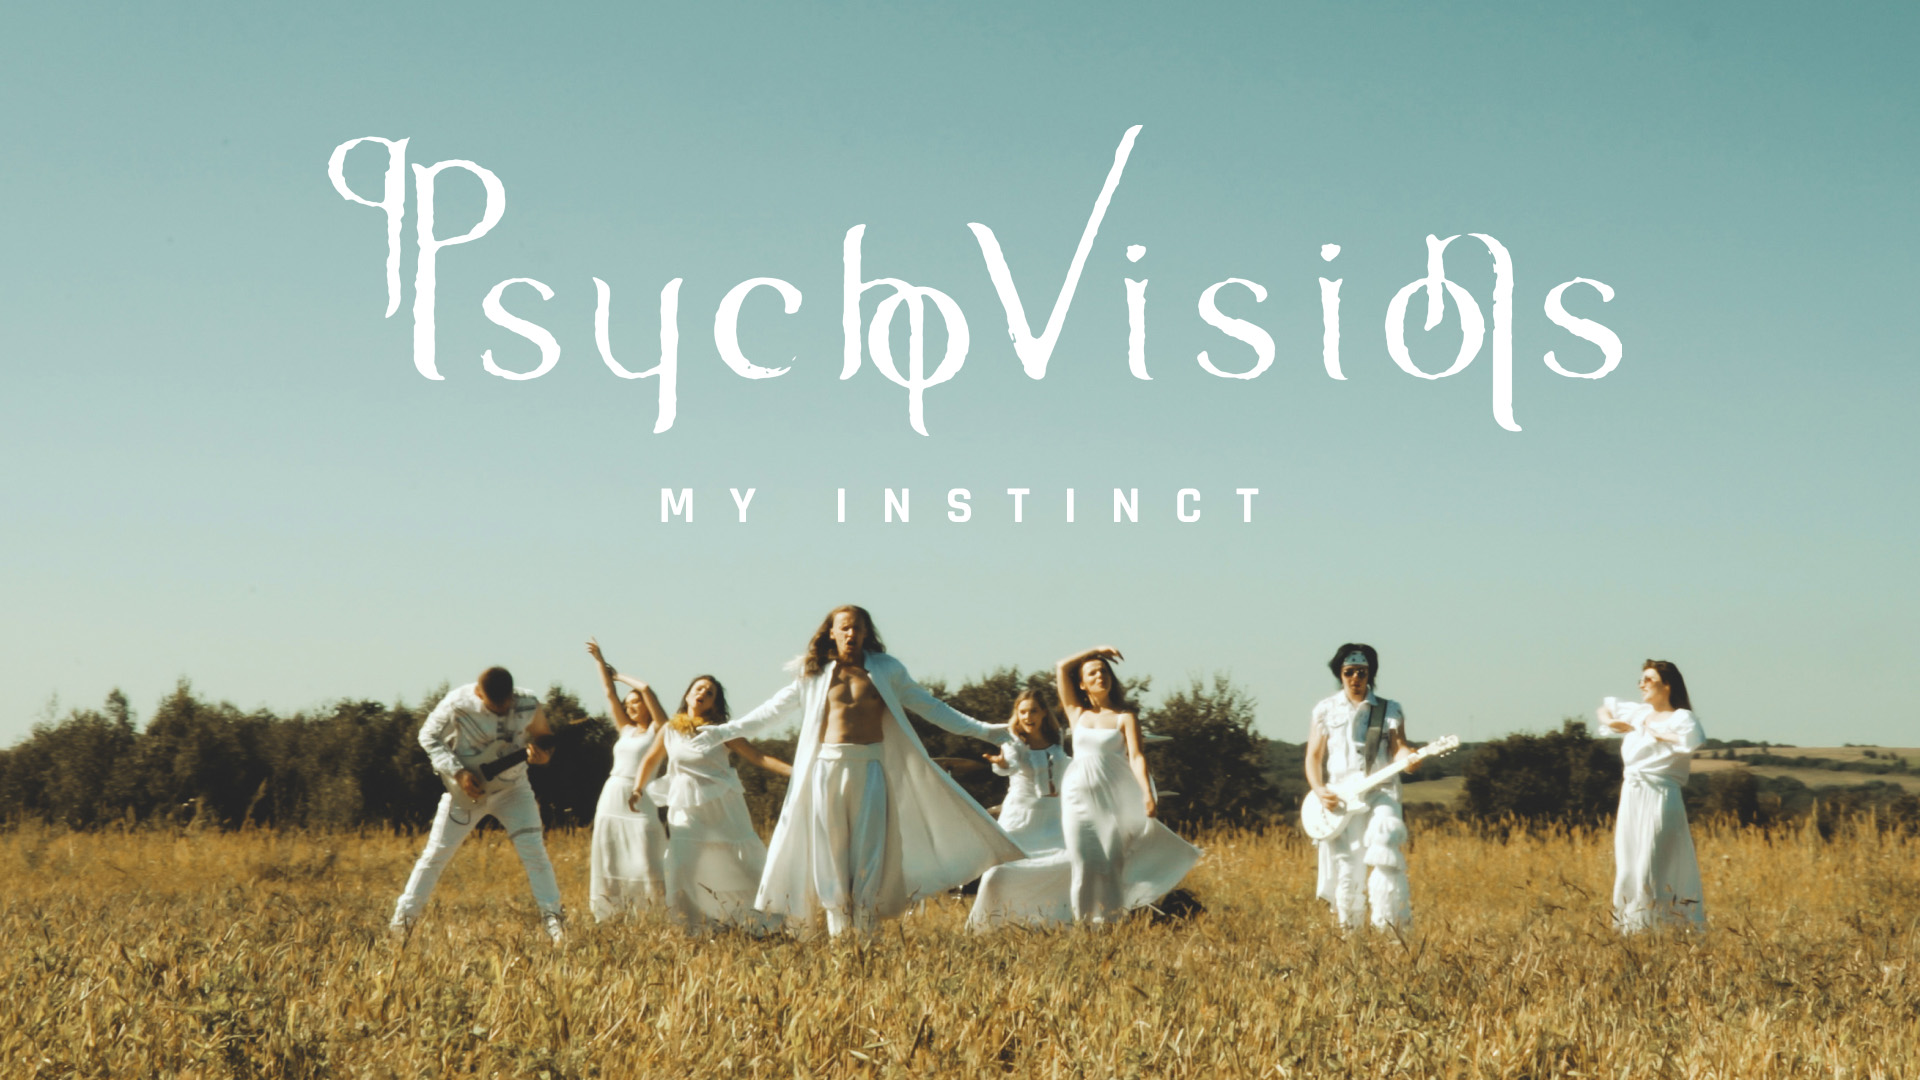 Psycho Visions - “My instinct” single and video premiere!